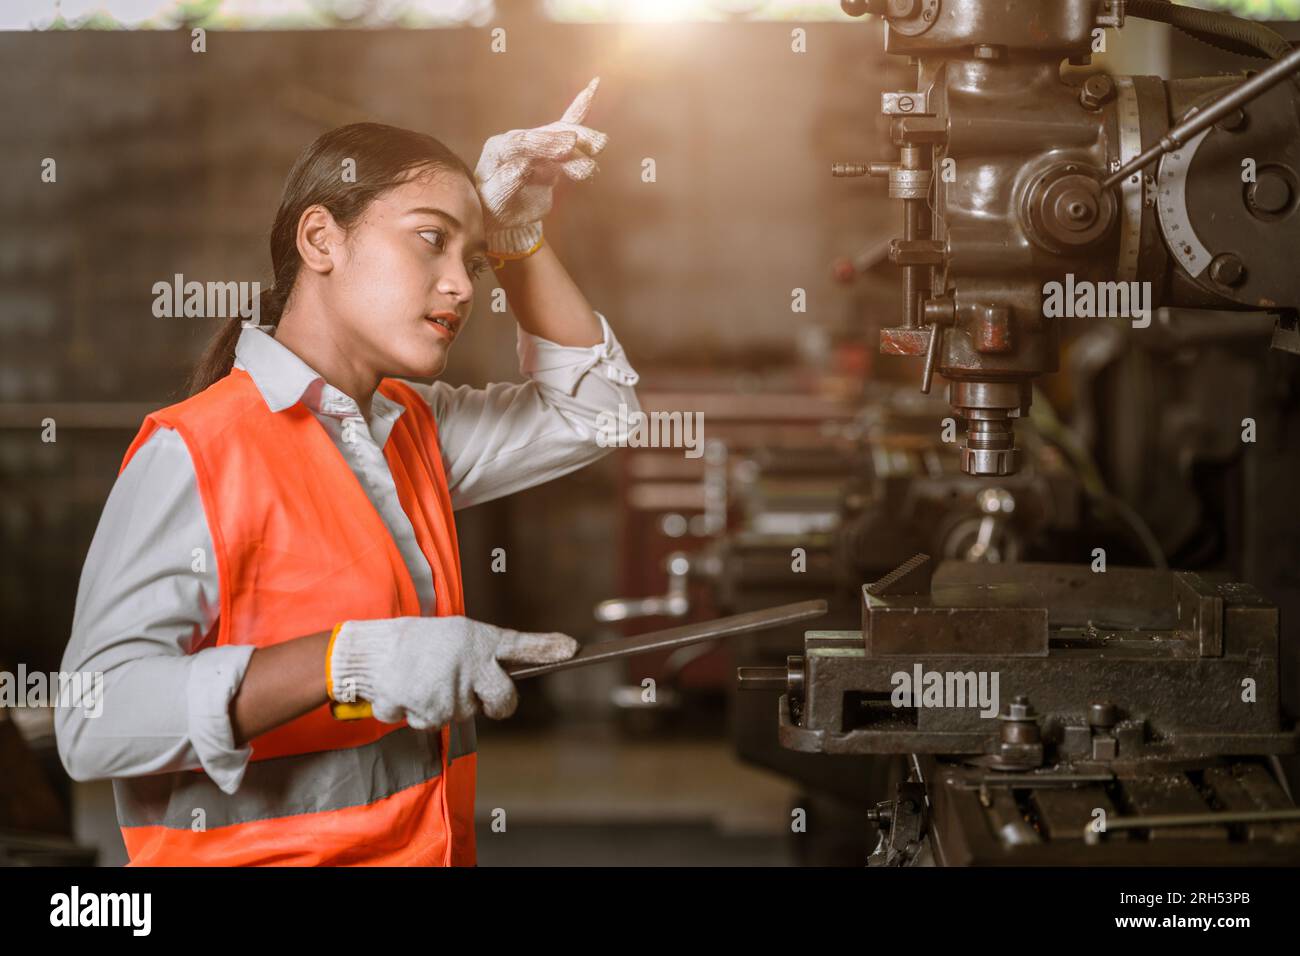 tired stress young woman worker sweating hard working in danger heavy metal industry Stock Photo